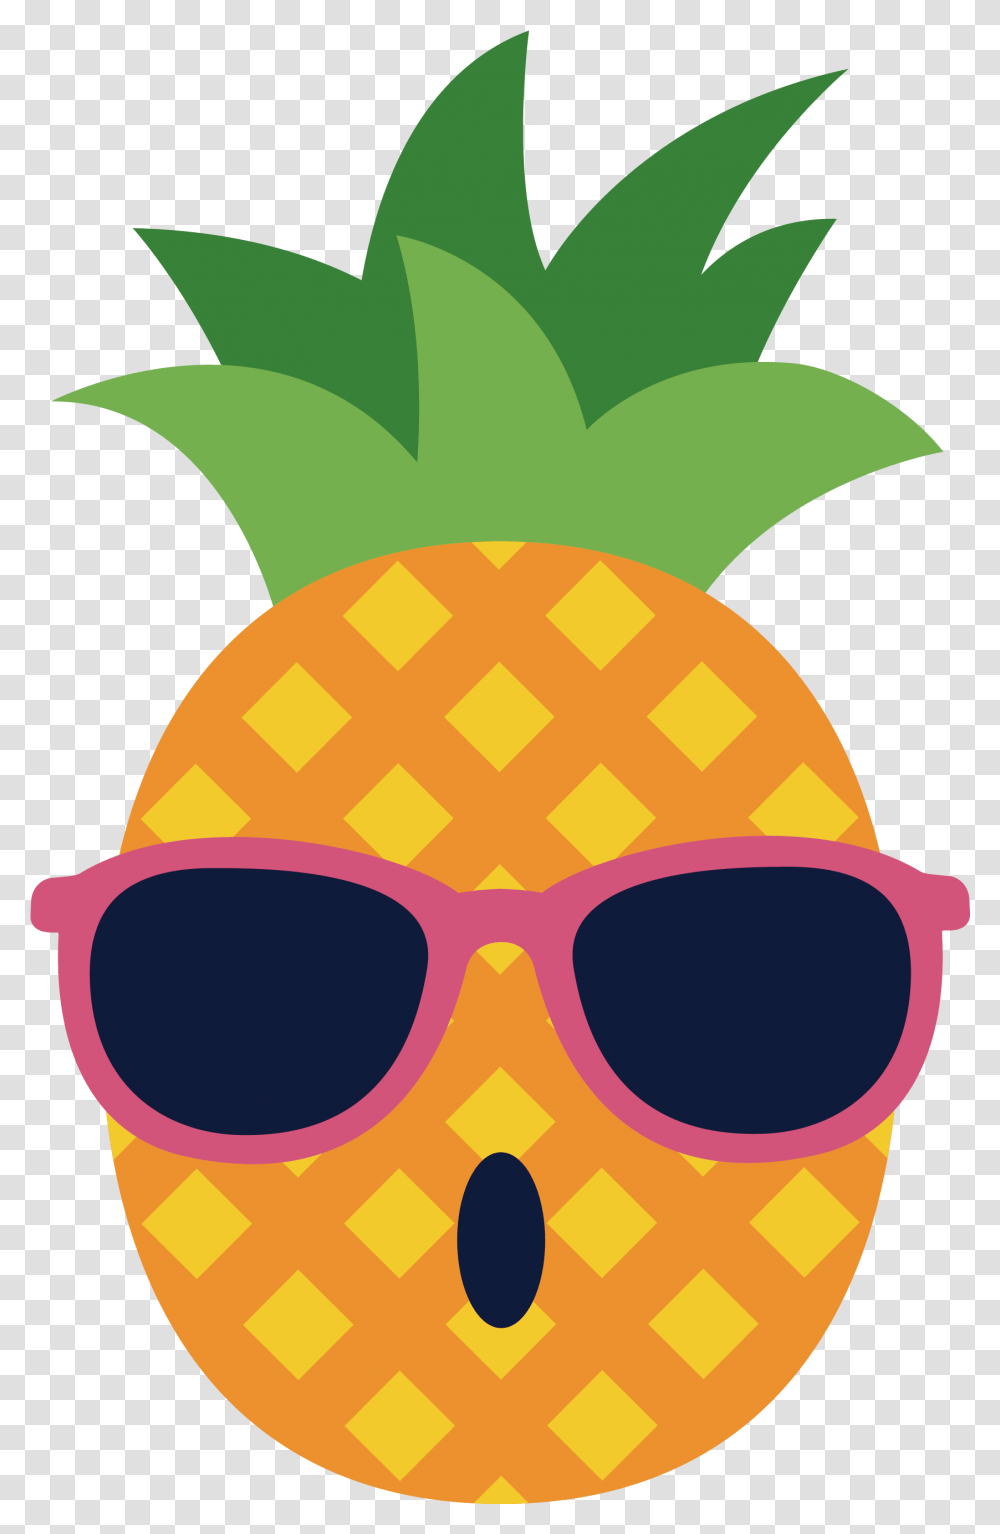 Download Vector Of Spectacles Glasses Draw A Pineapple With Sunglasses, Accessories, Accessory, Plant, Food Transparent Png